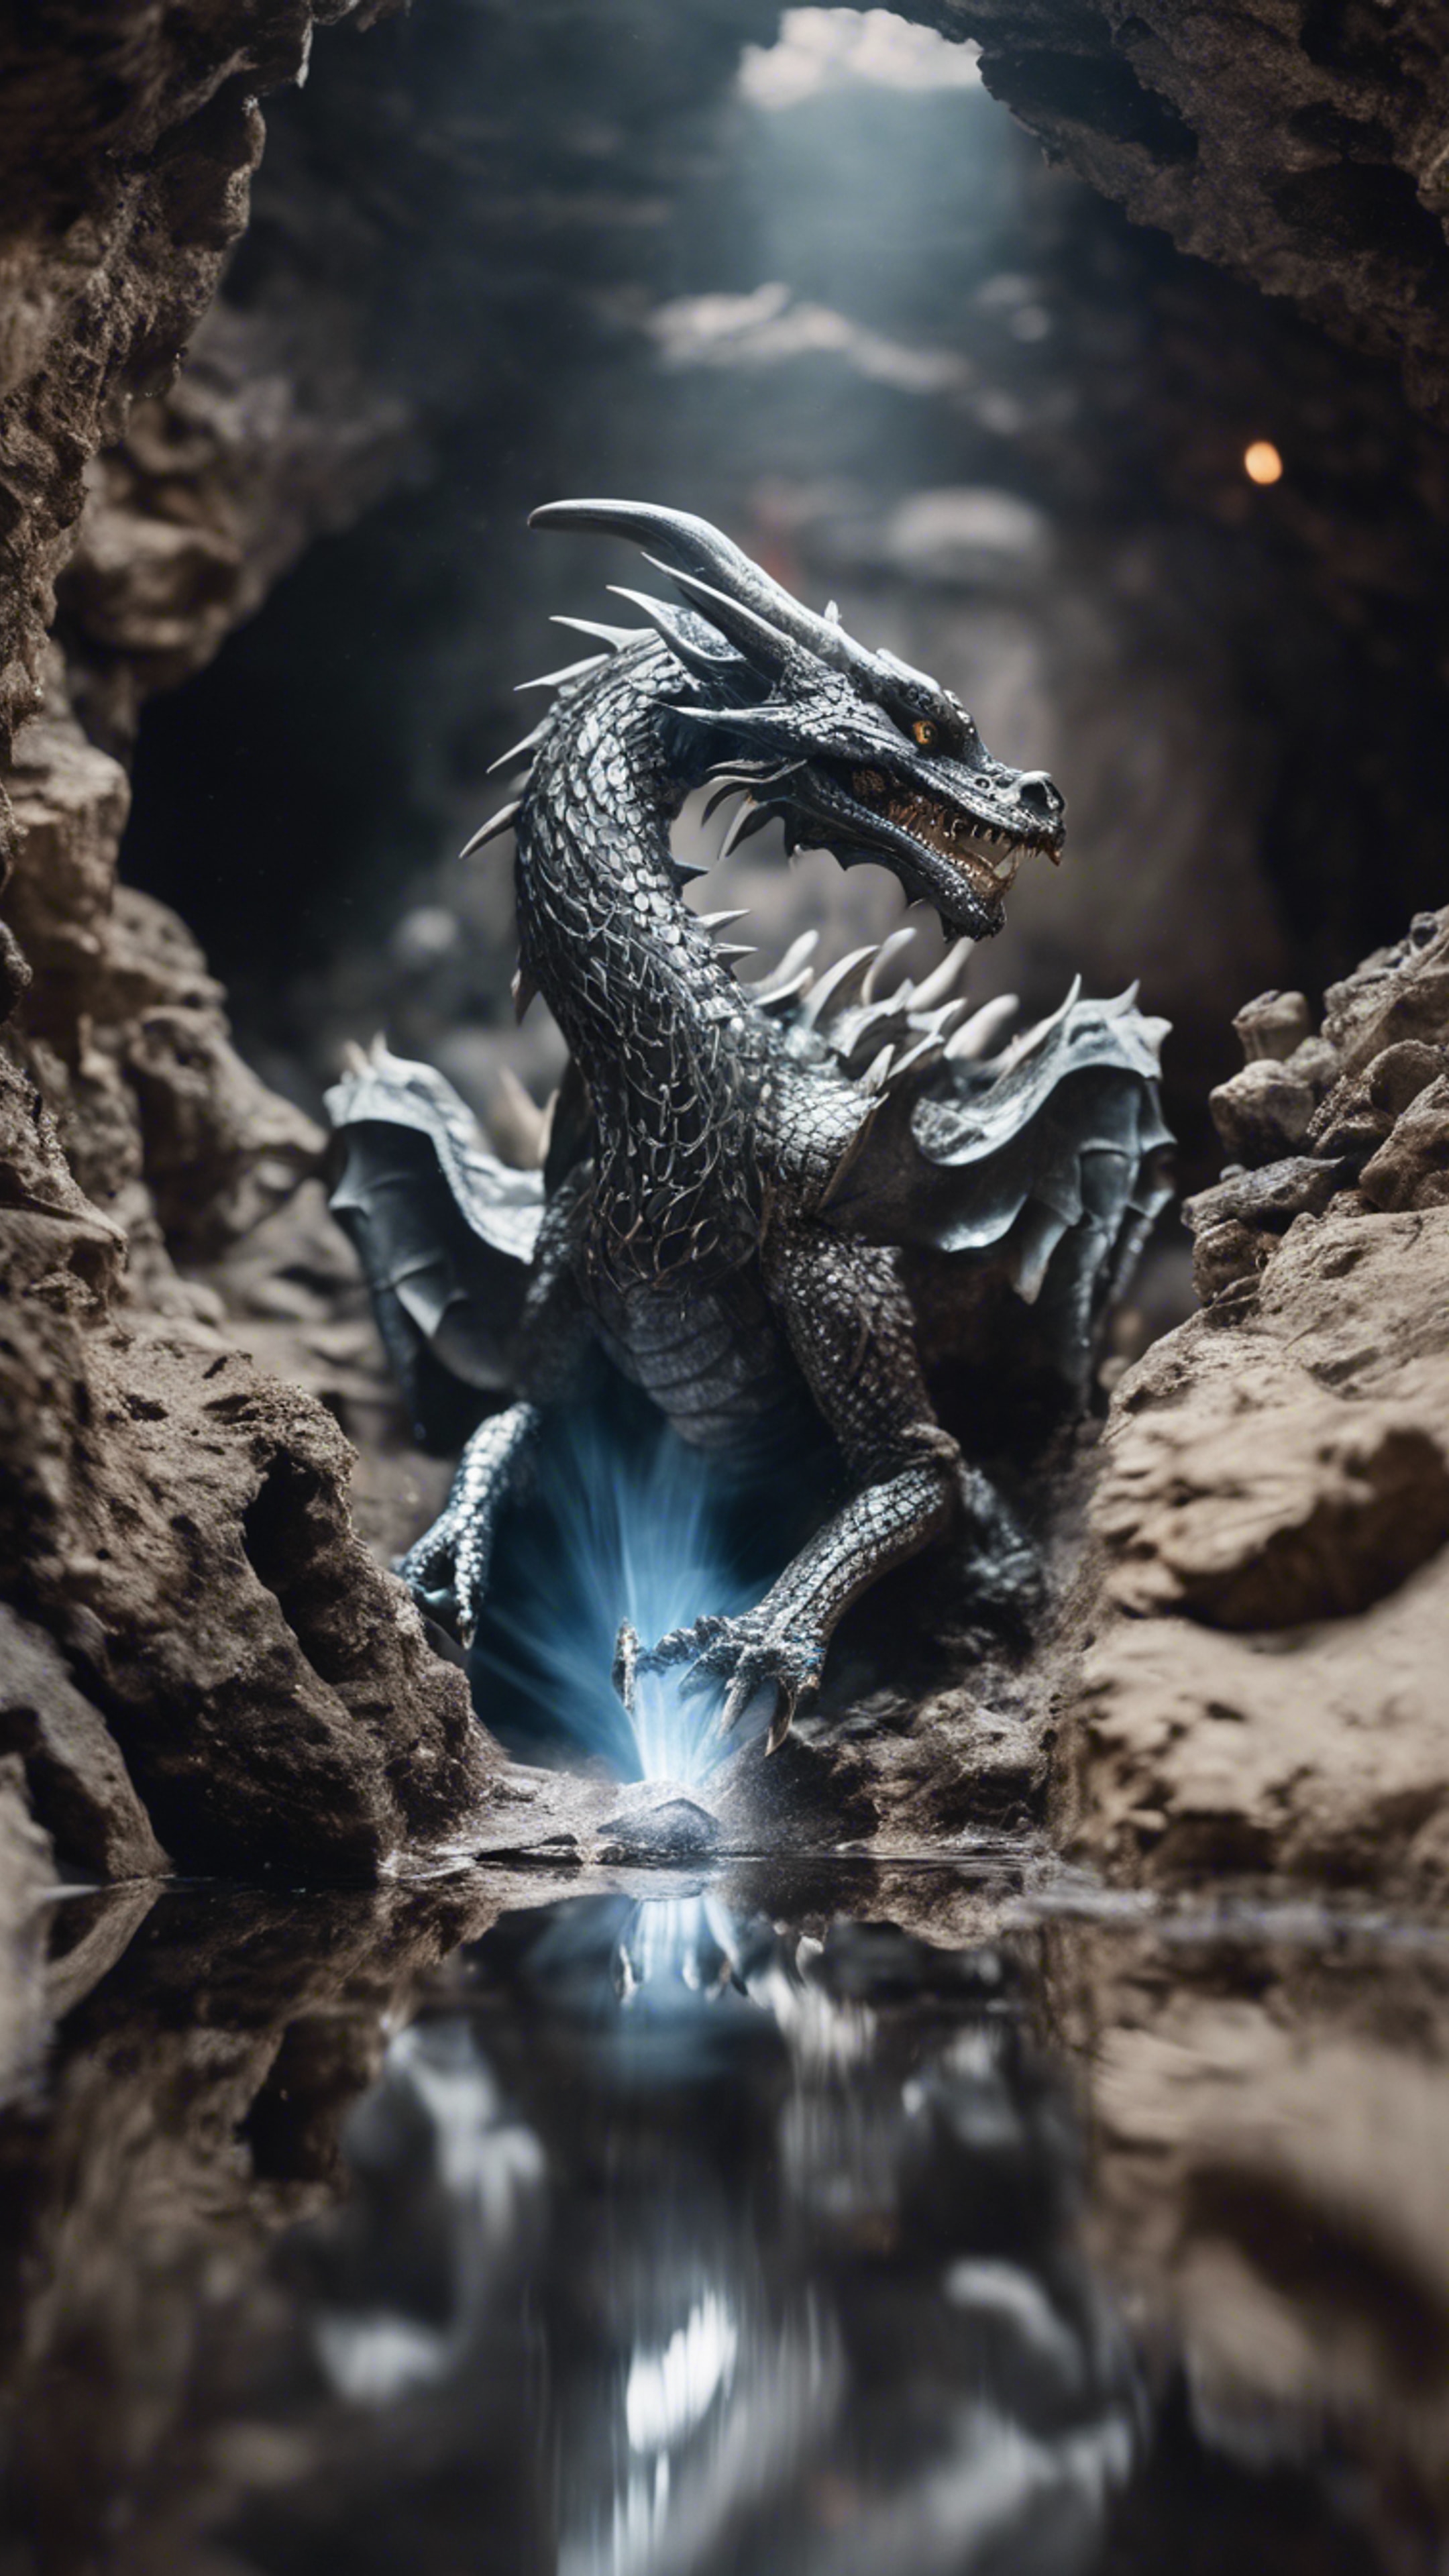 A cool dragon of pure quicksilver, fluid and reflective, darting through a forgotten mine shaft. Wallpaper[4f182db5f22341209a39]